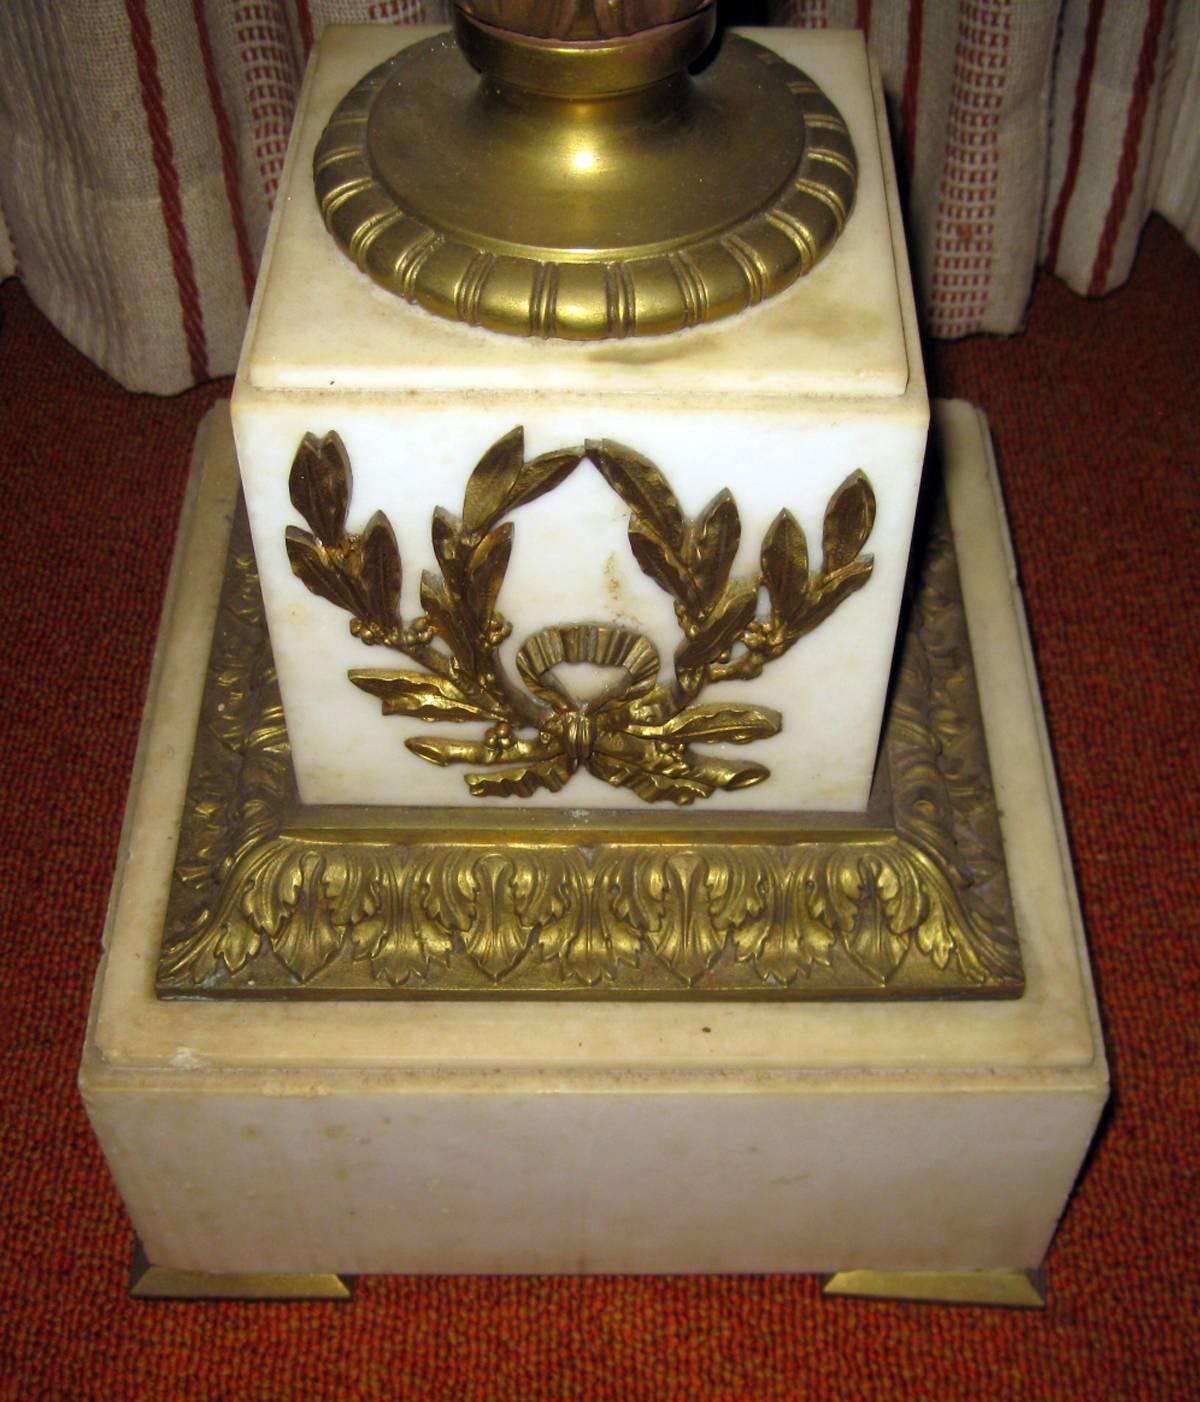 Louis XVI style French solid marble pedestal featuring gilt decoration and ormolu mounts in an acanthus leaf and laurel wreath motif.
See measurements below.